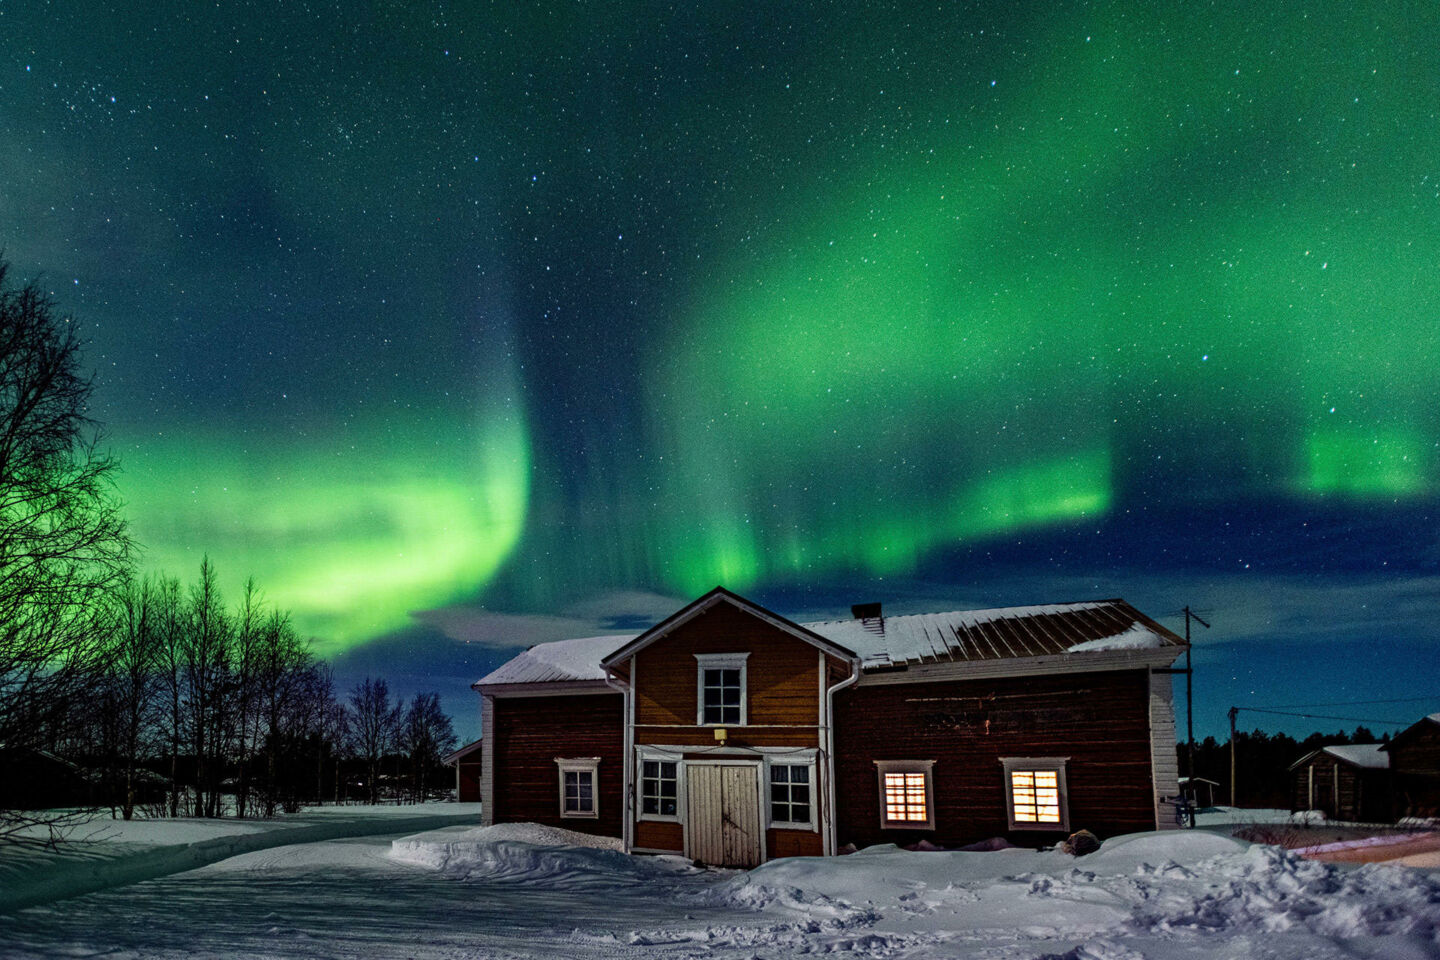 Northern Lights over a cabin in Suvanto, a 19th century village and filming location in Finnish Lapland